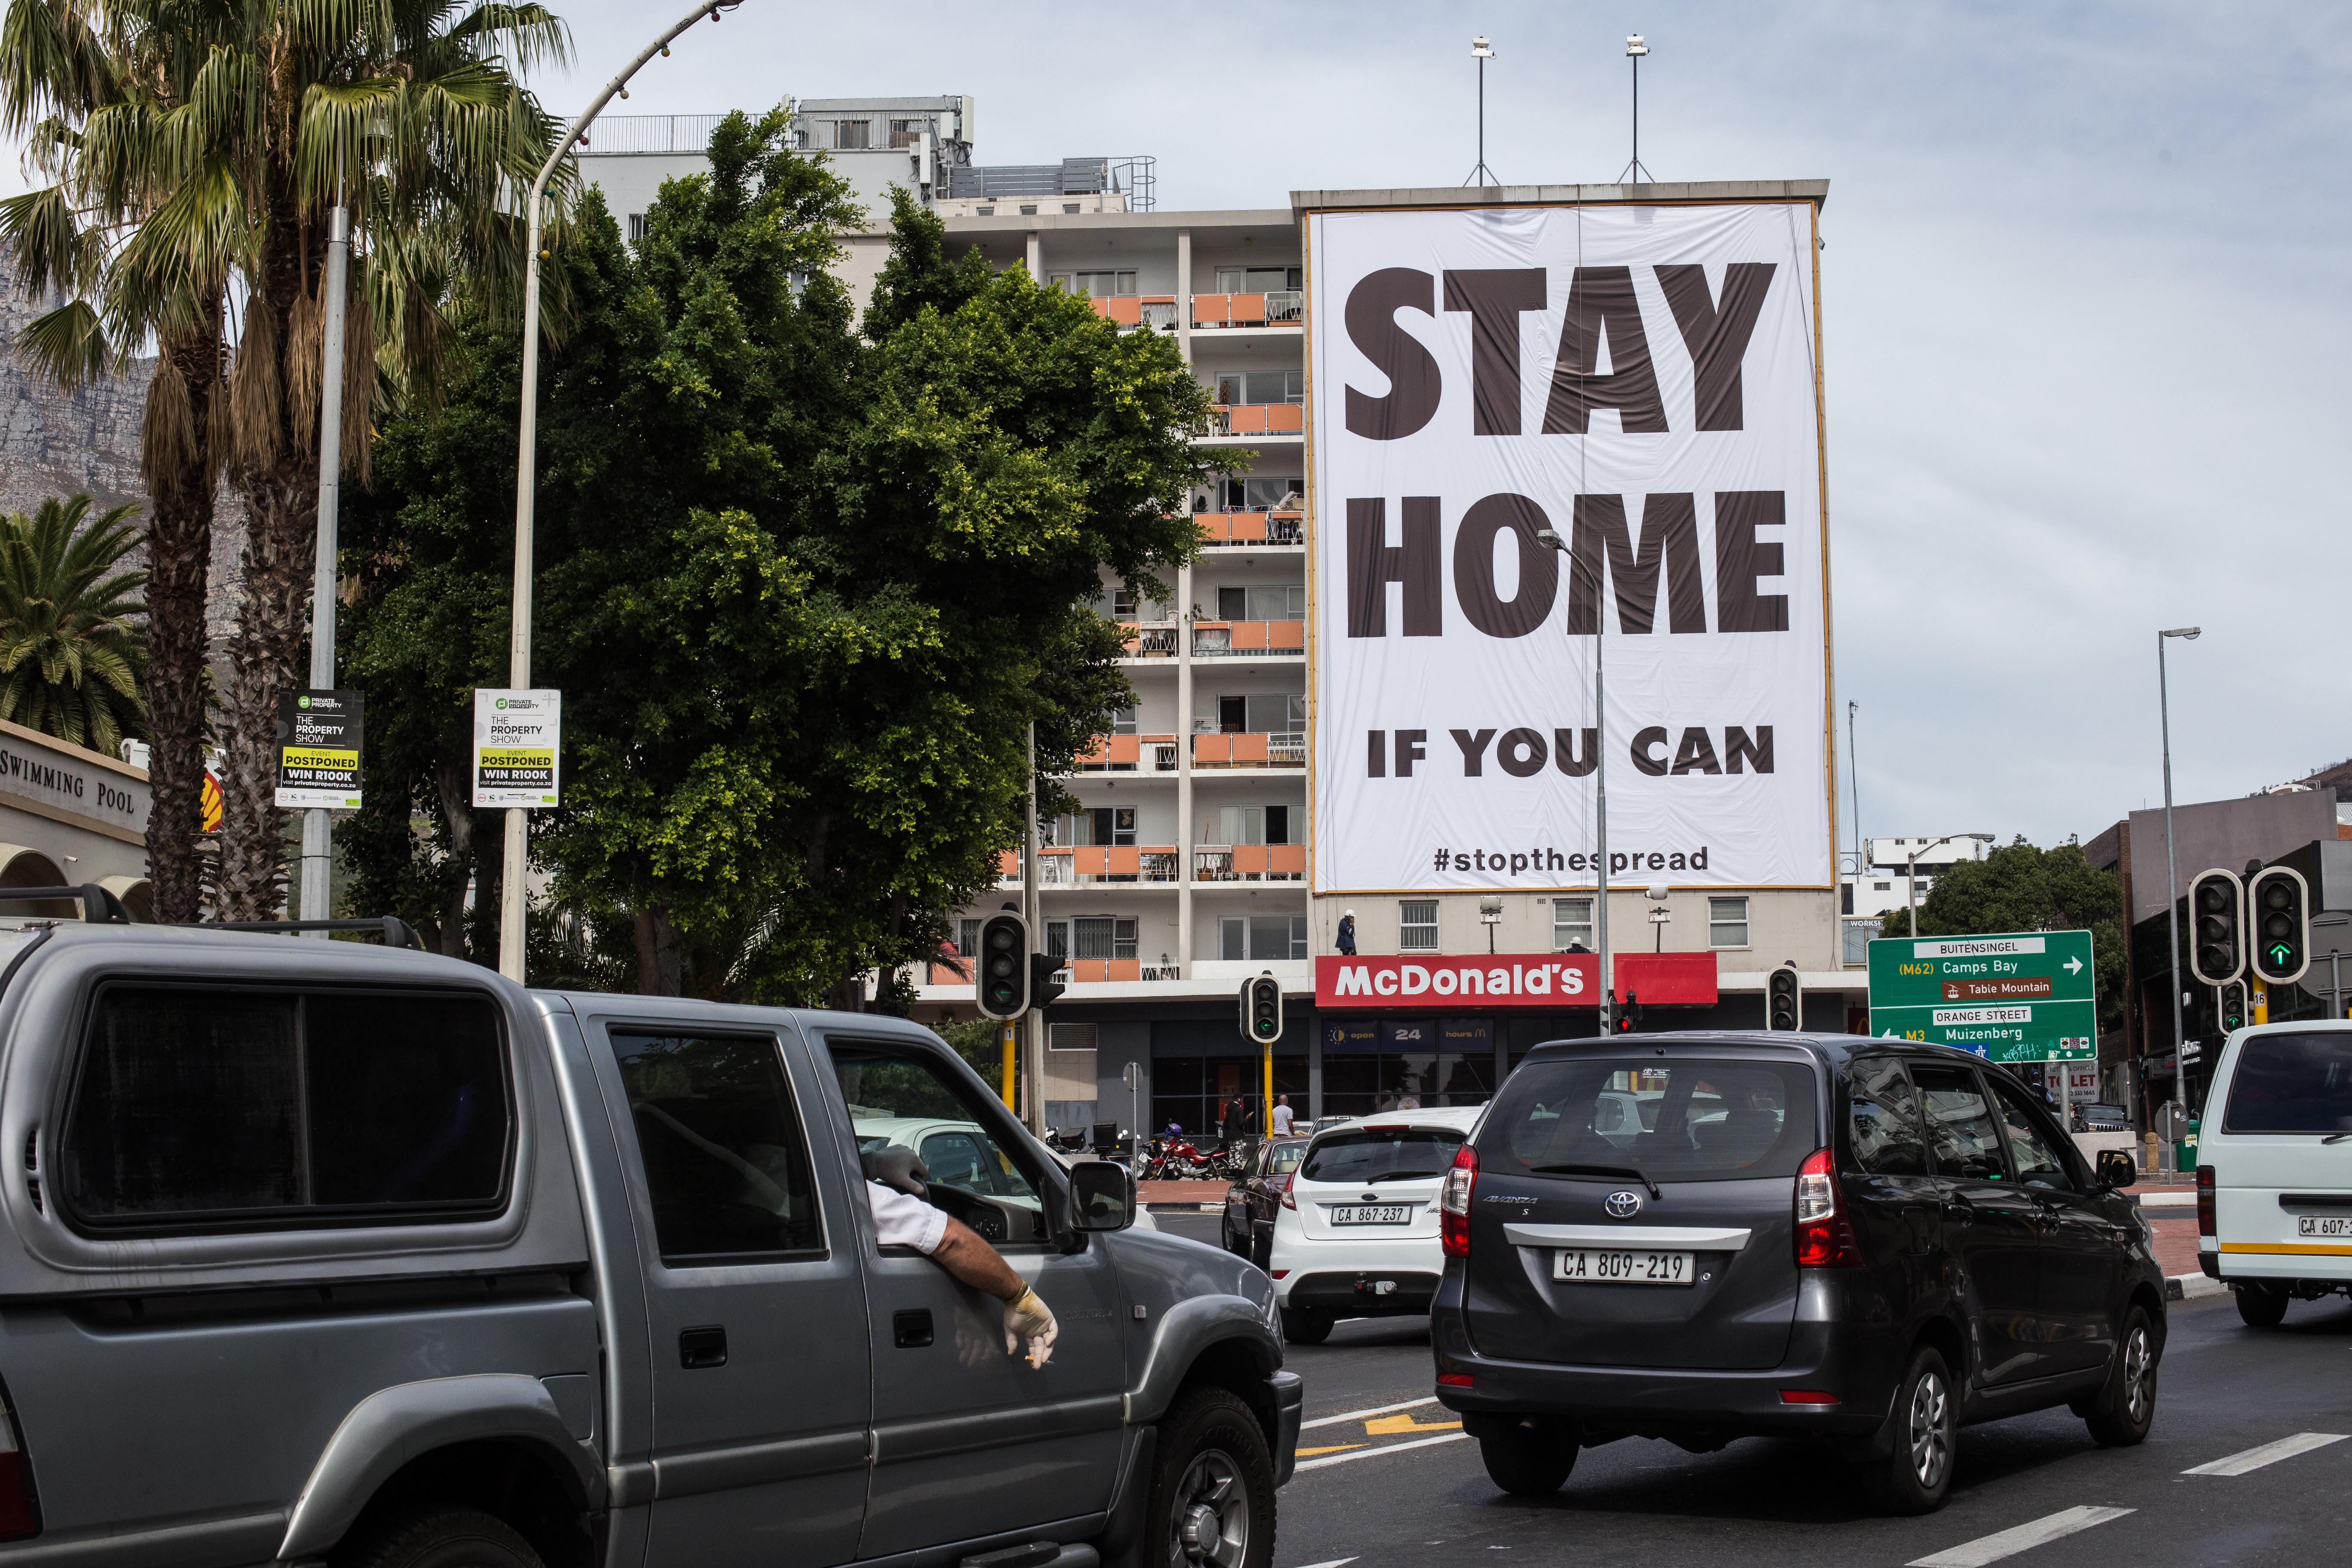 The sign with the words "Stay home, if you can"